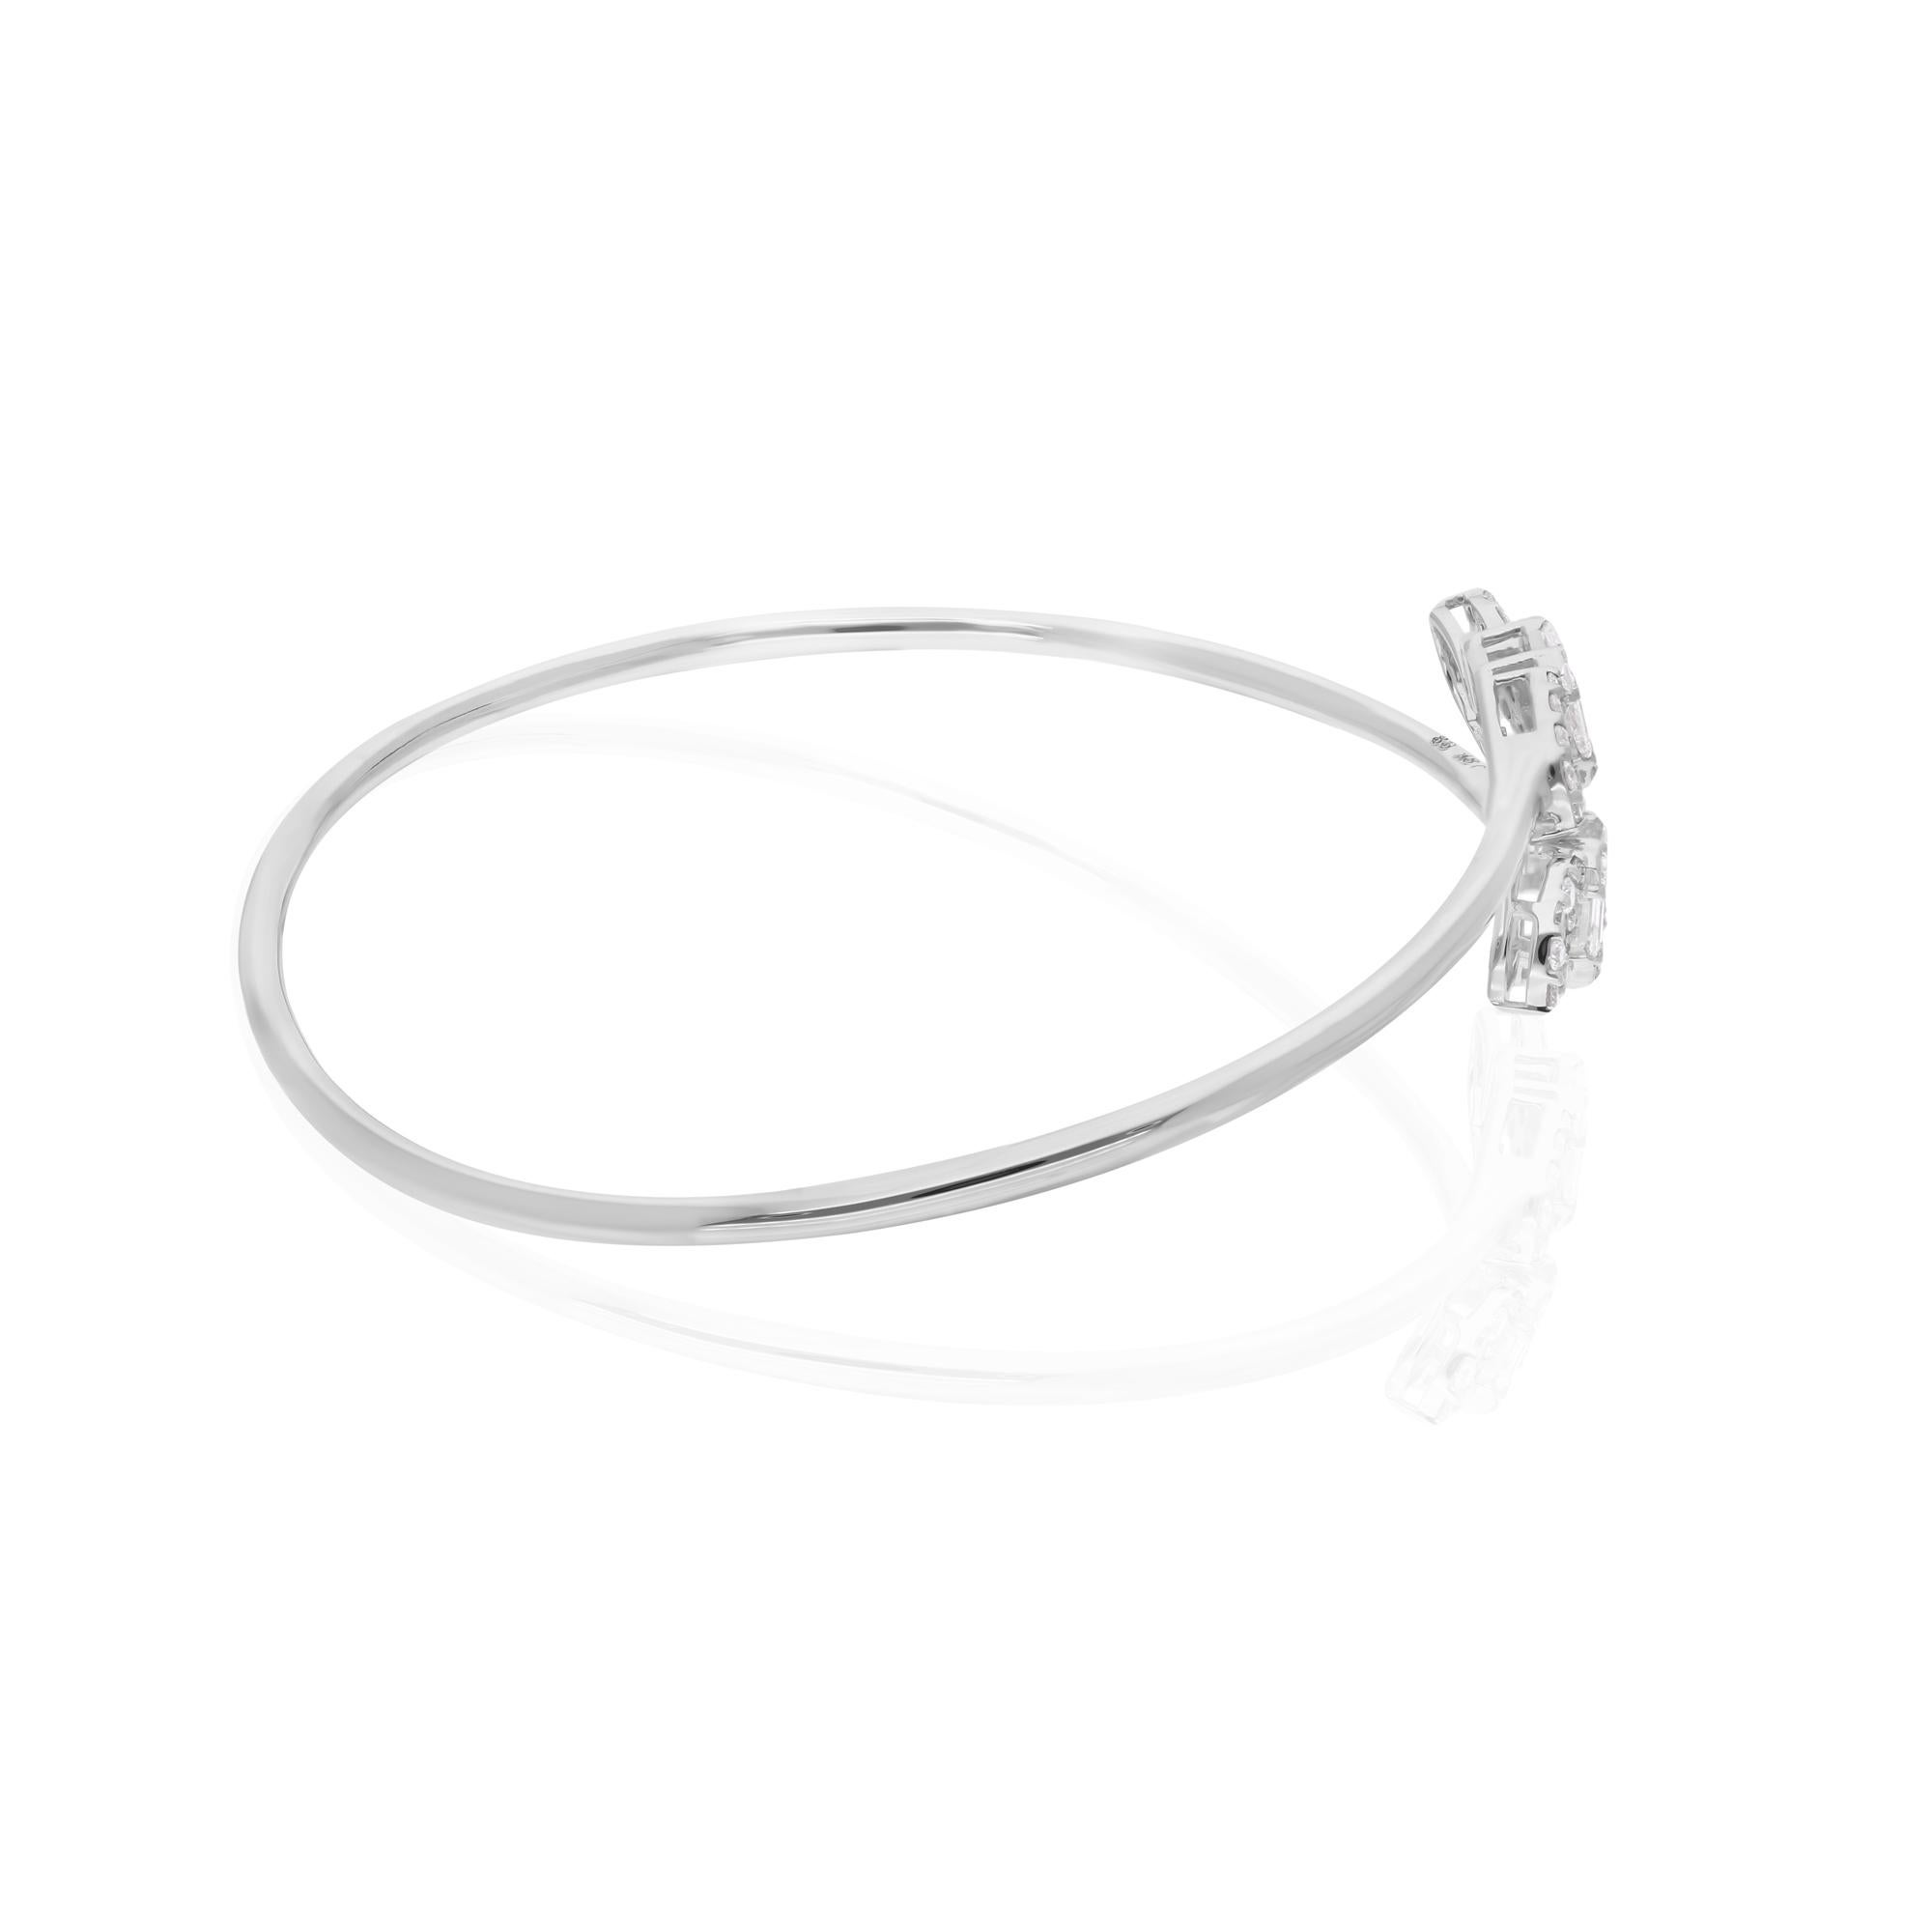 Indulge in the timeless elegance of this exquisite 0.90 Carat Baguette Round Diamond Bangle Bracelet, crafted with meticulous attention to detail in 14 Karat White Gold. This stunning piece of jewelry exudes sophistication and luxury, making it a